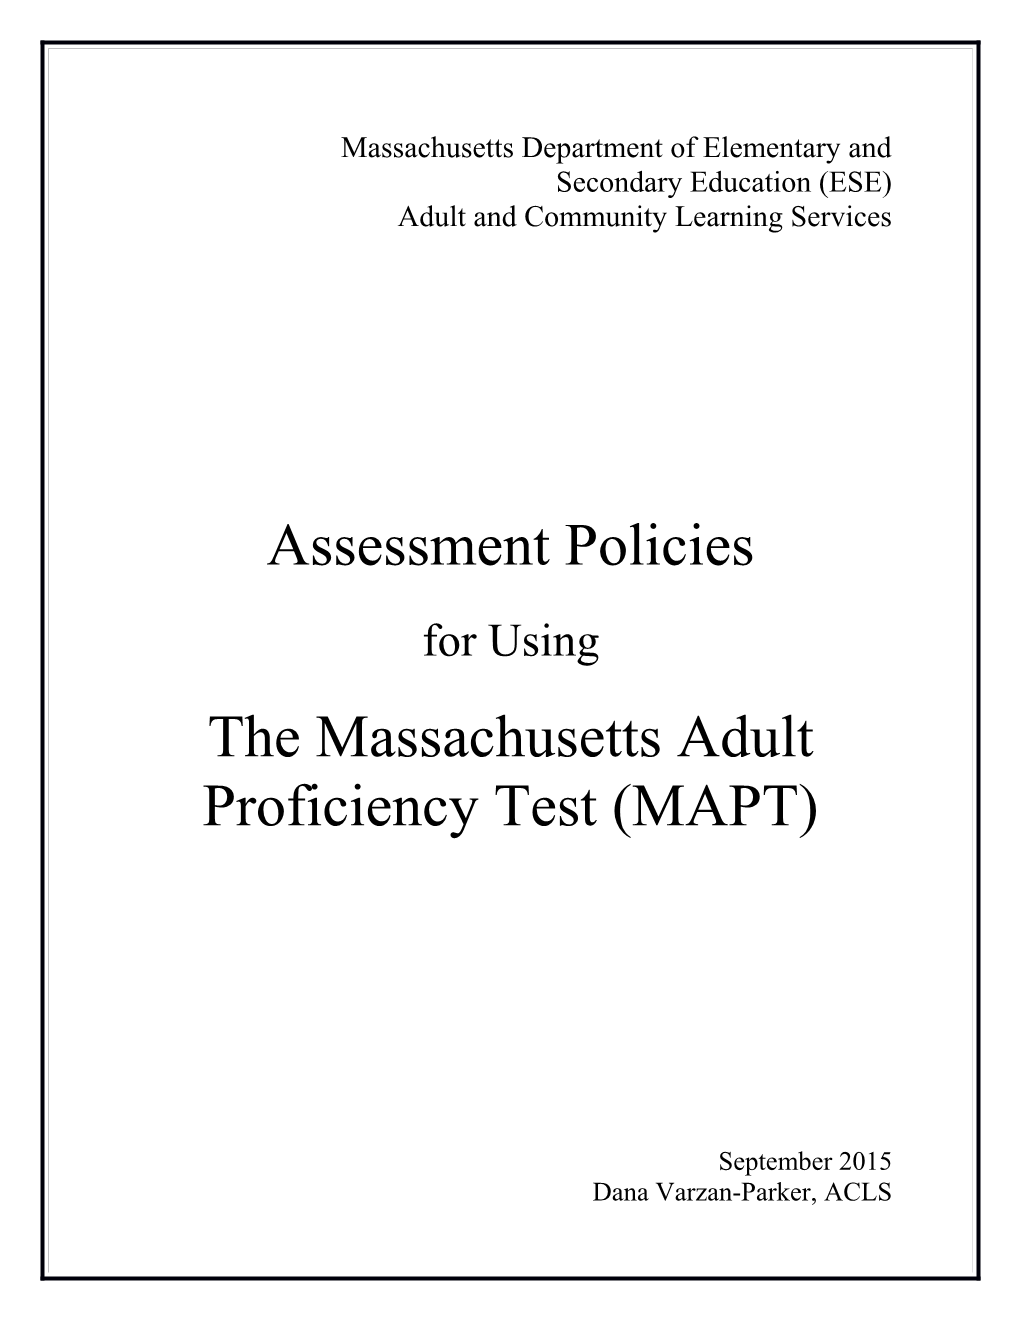 Policies for Using the MAPT